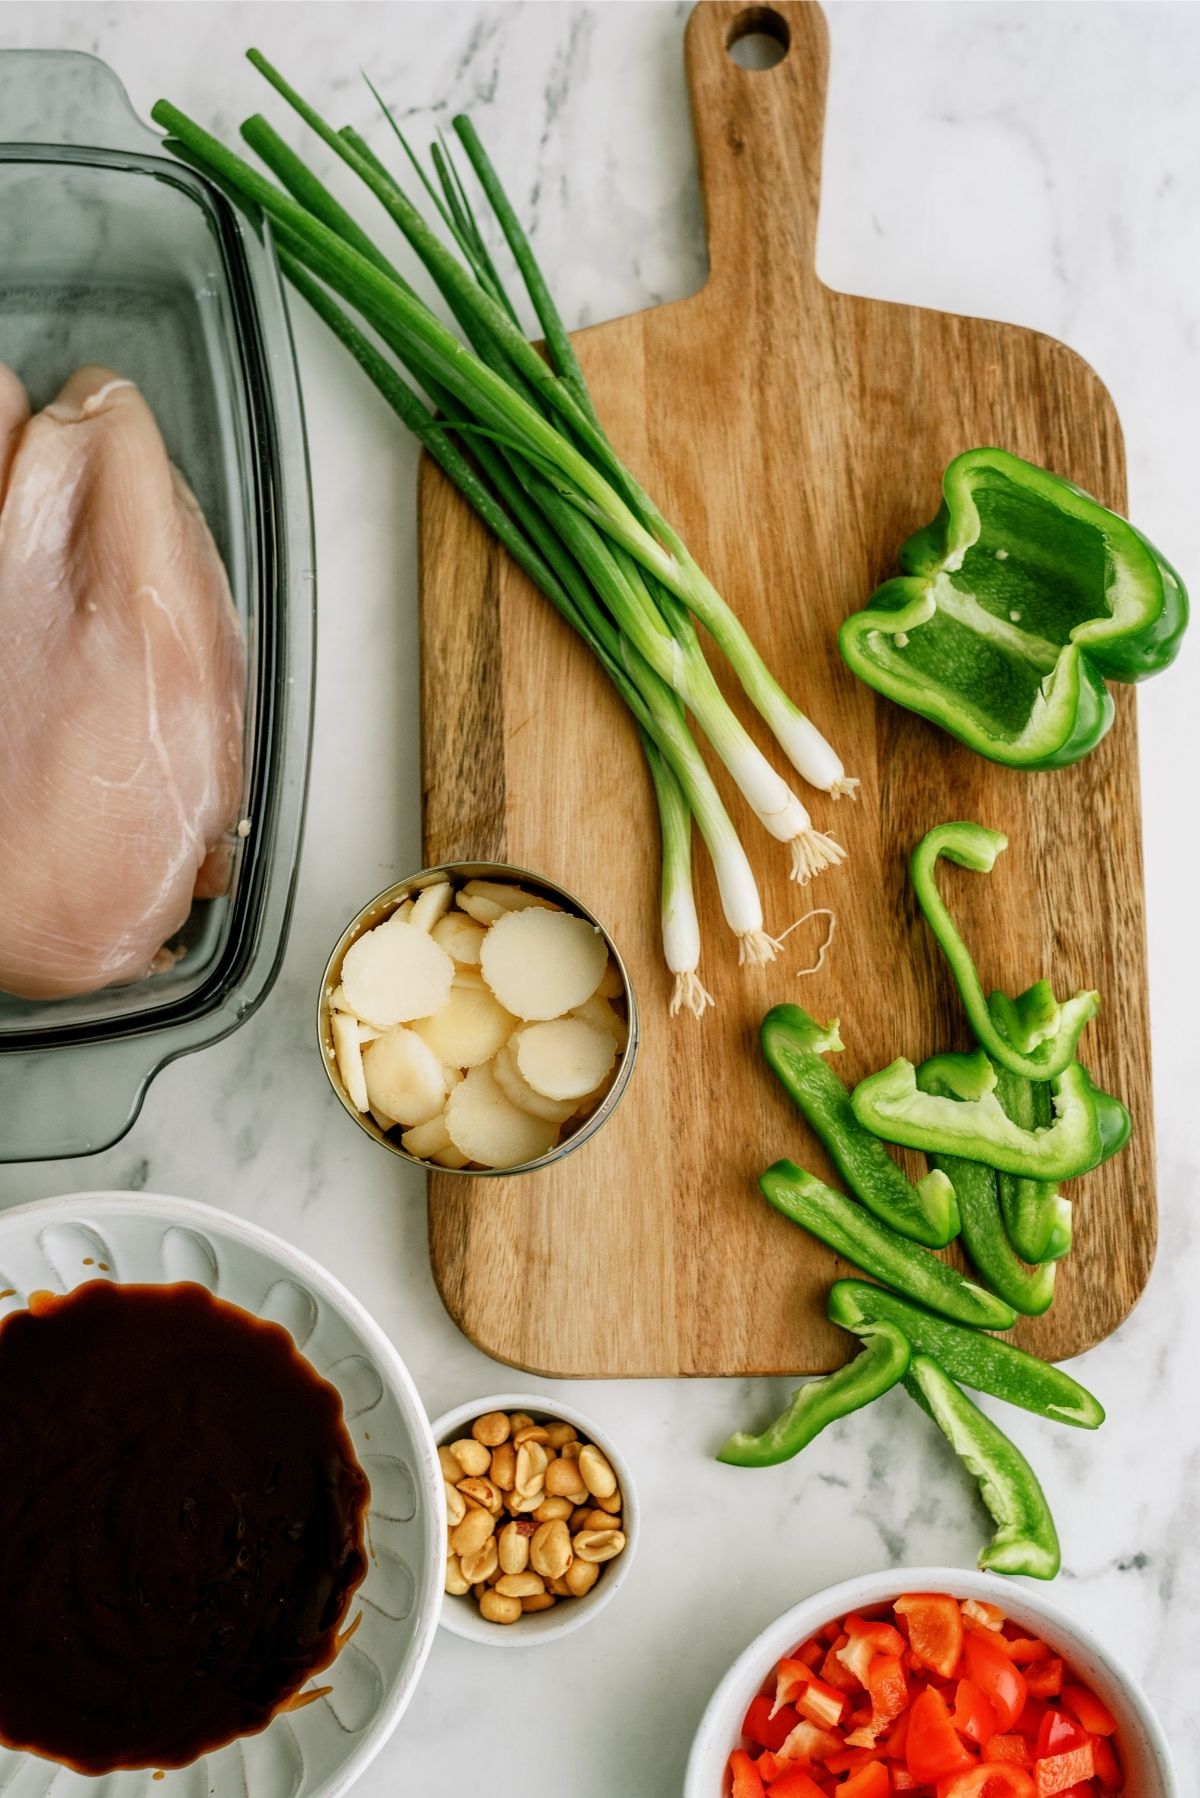 Ingredients for Slow Cooker Kung Pao Chicken Recipe